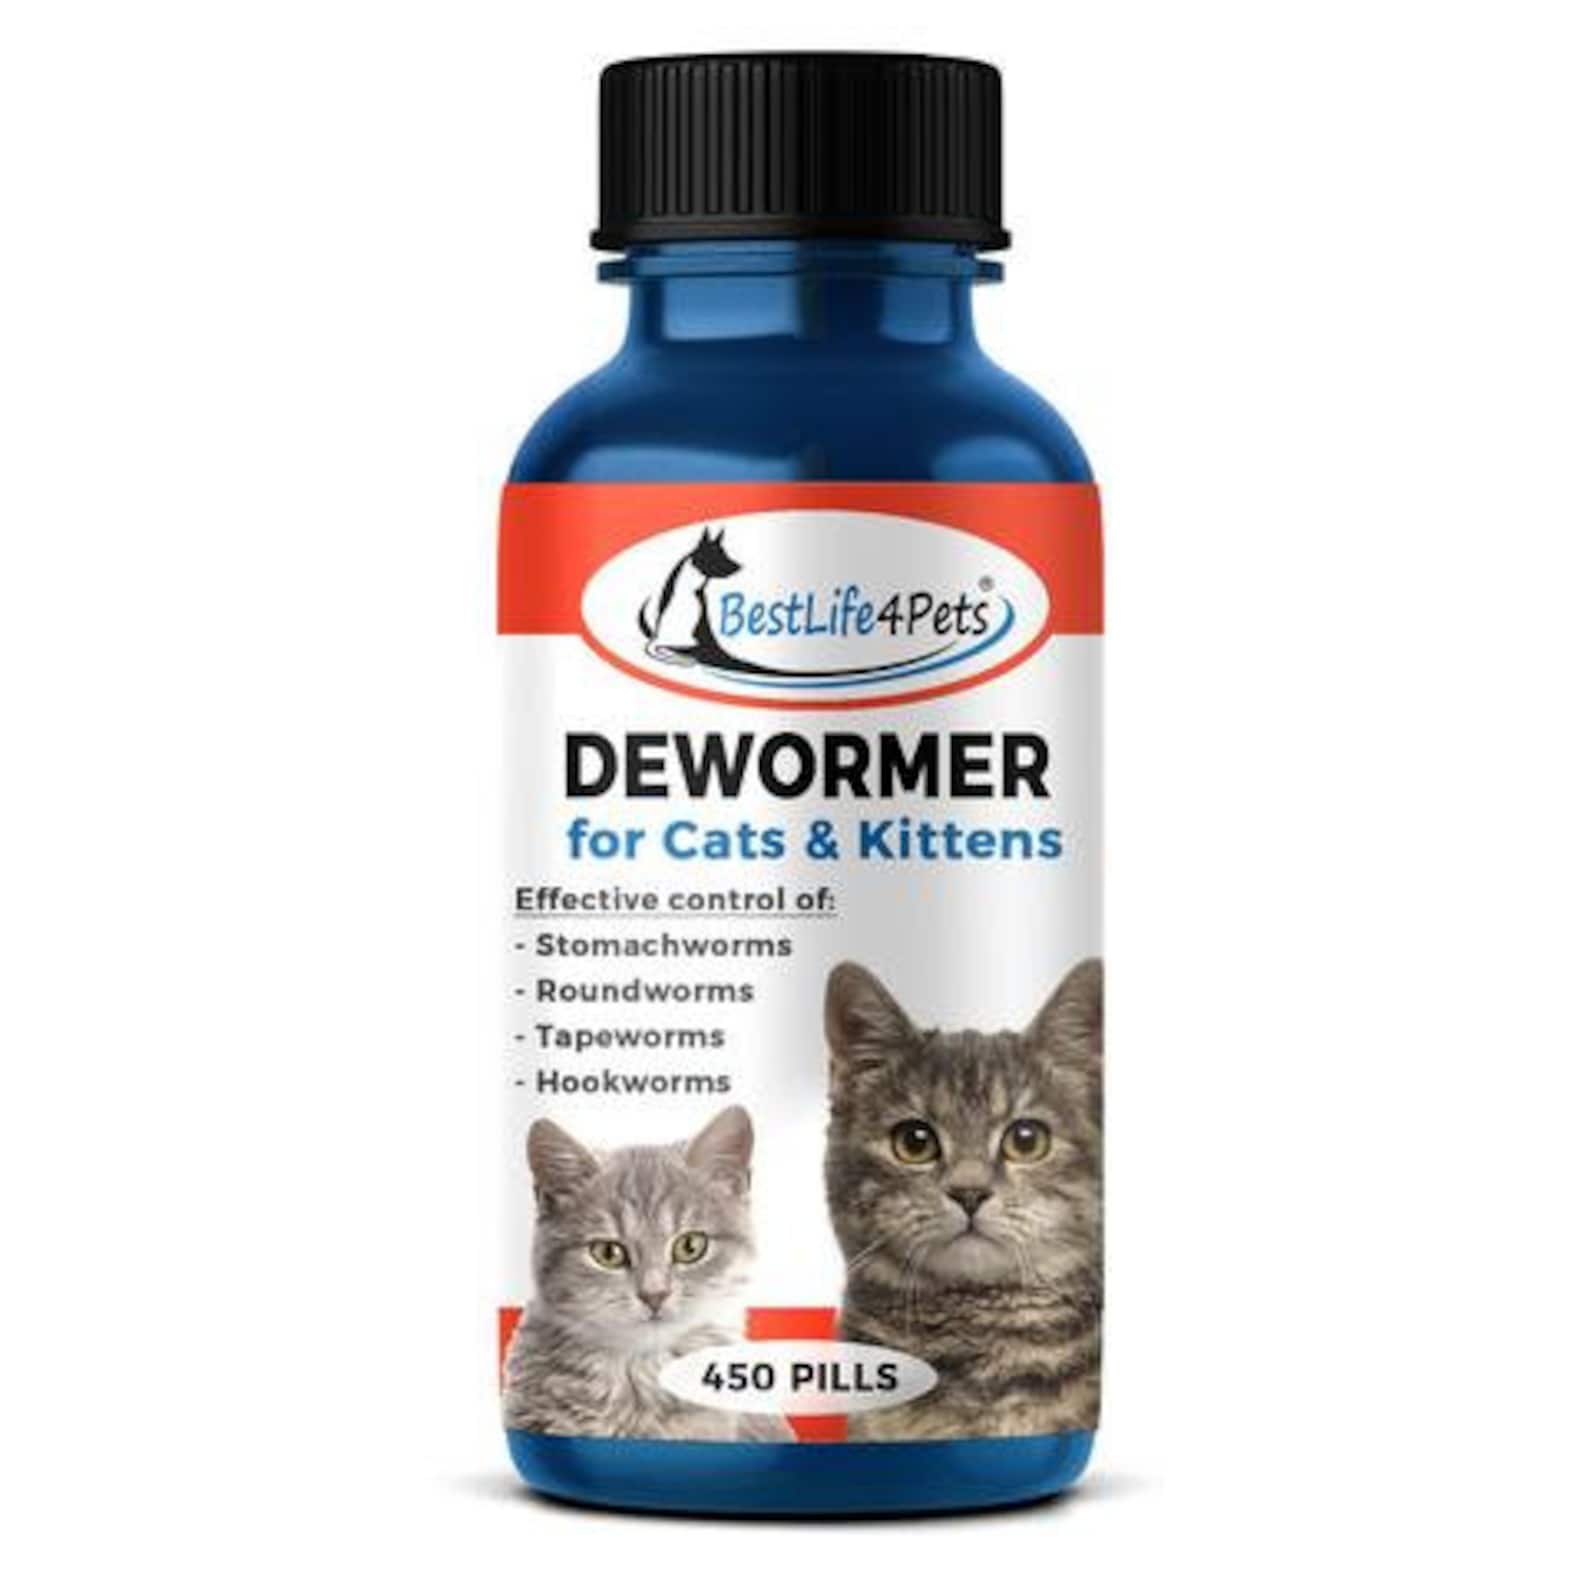 Dewormer for Cats and Kittens Broad Spectrum Feline Wormer